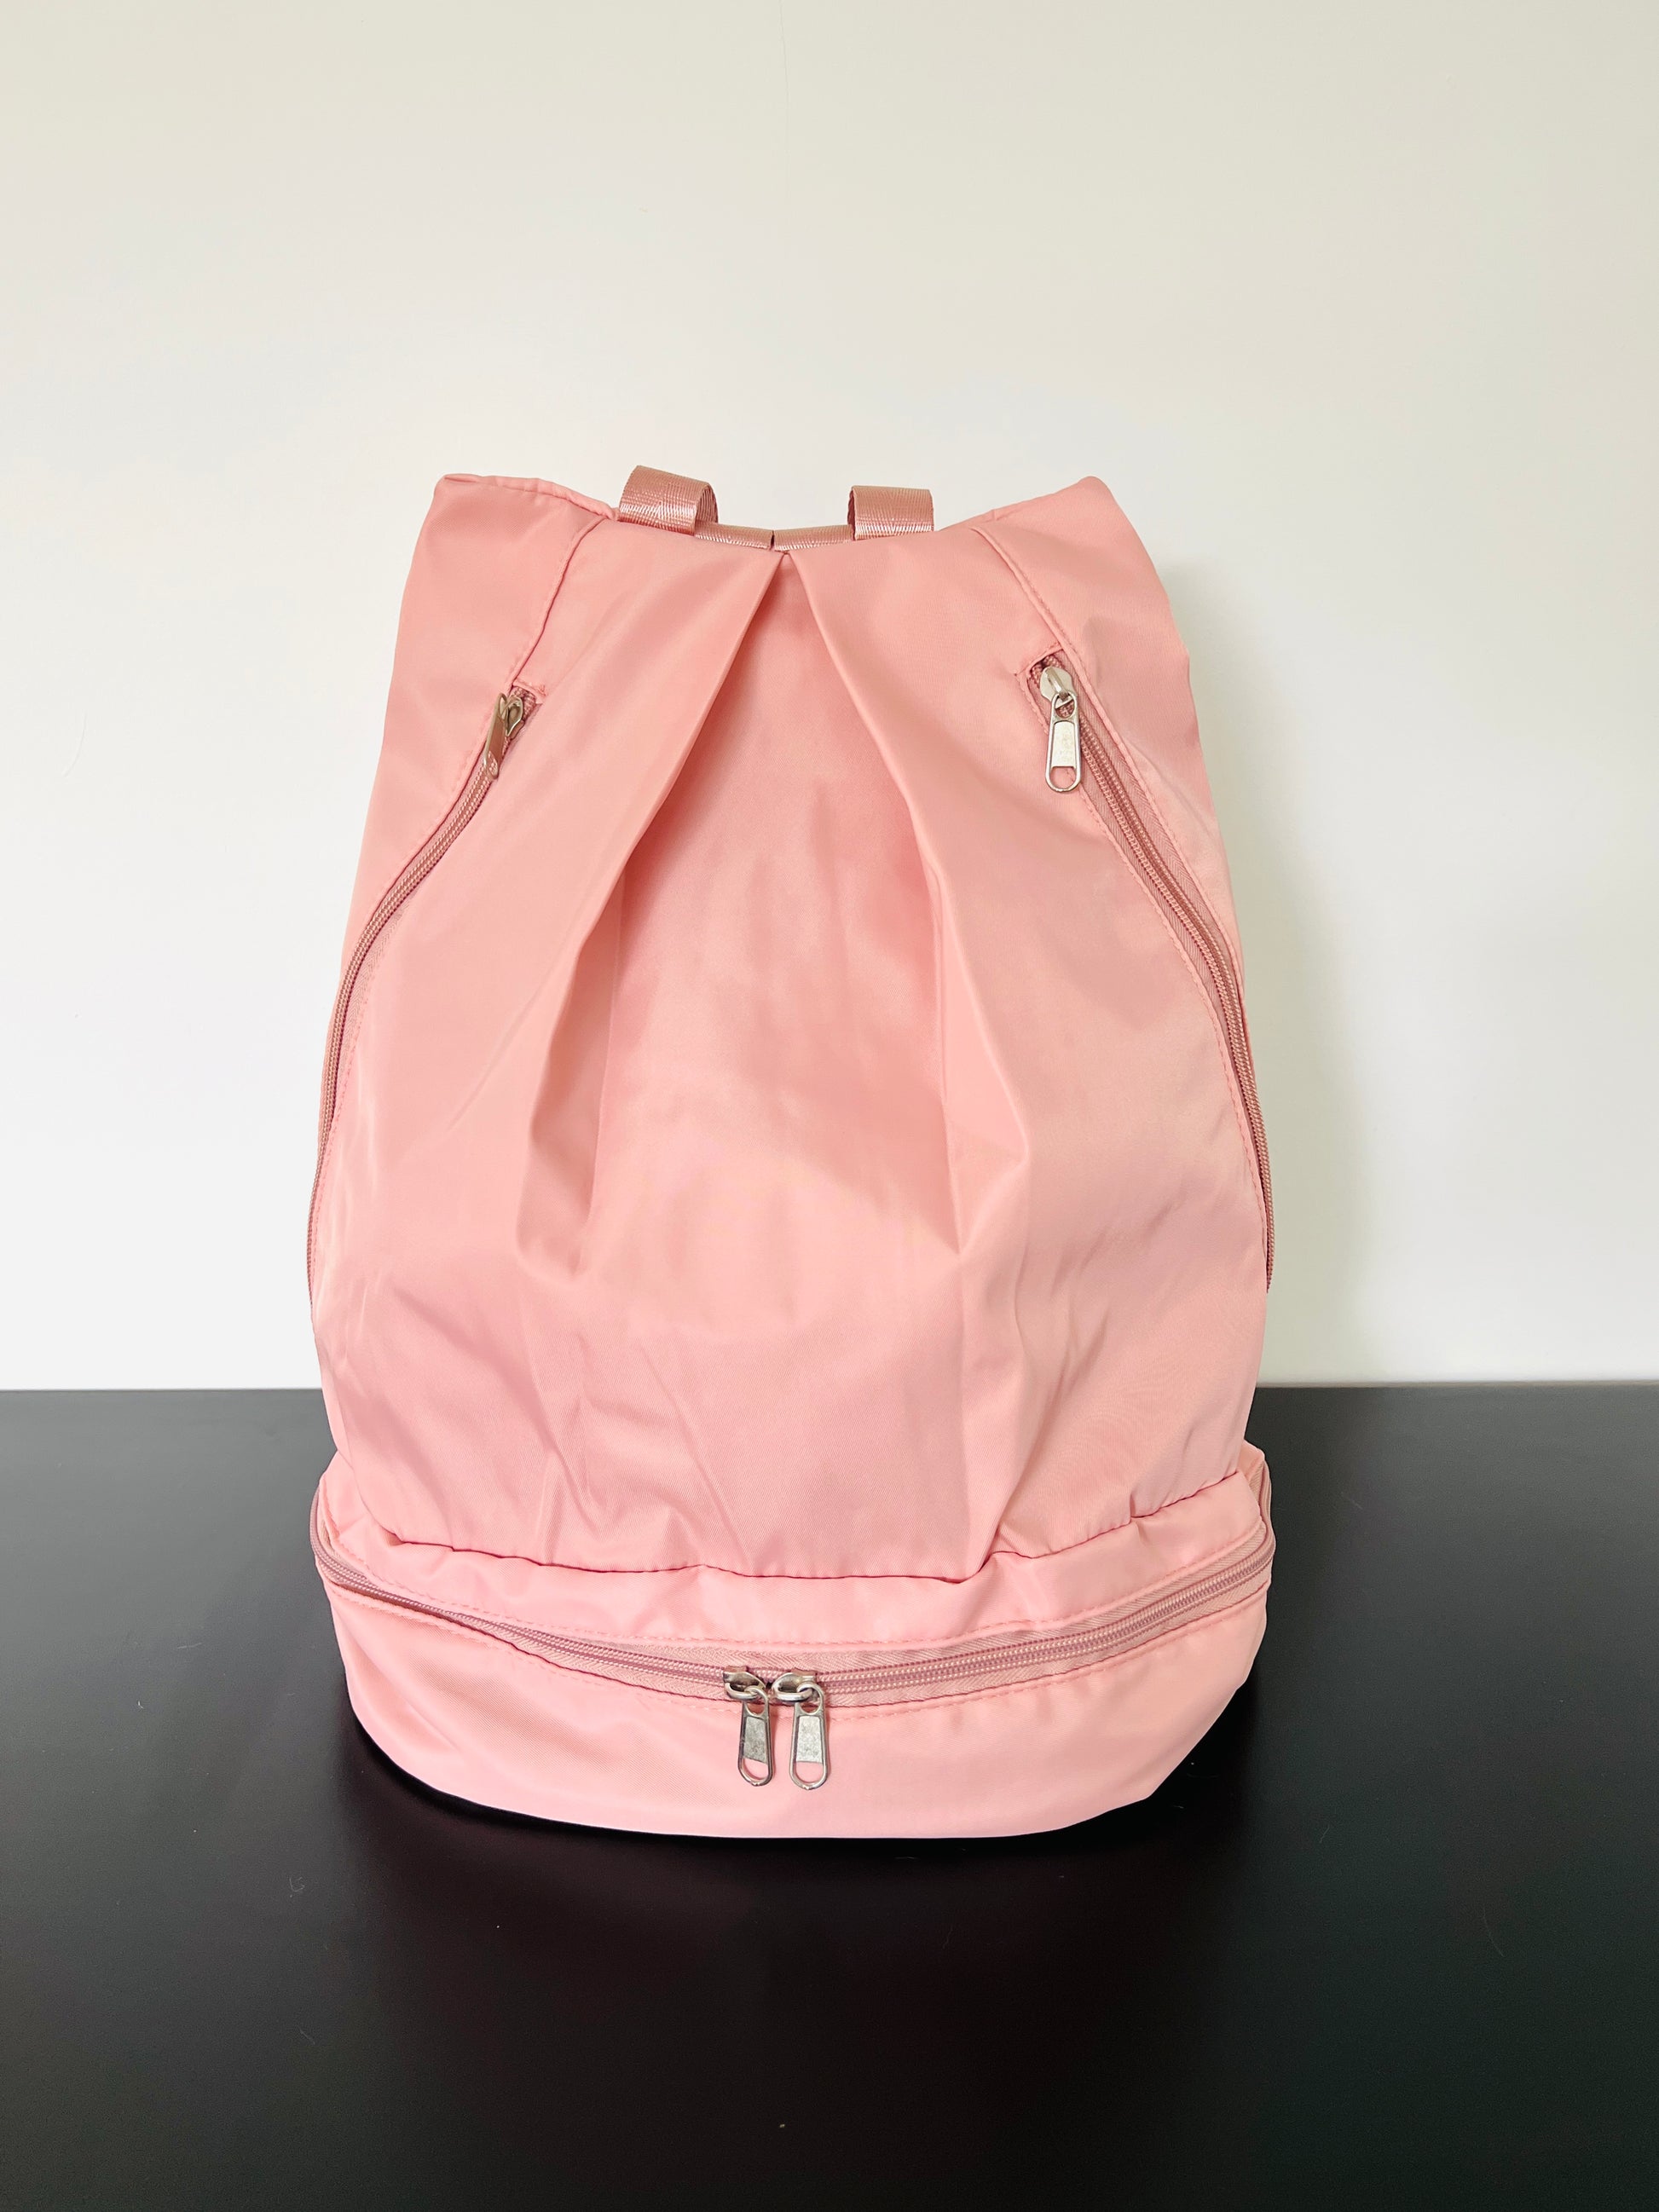 Dance back pack for ballet from The Collective Dancewear